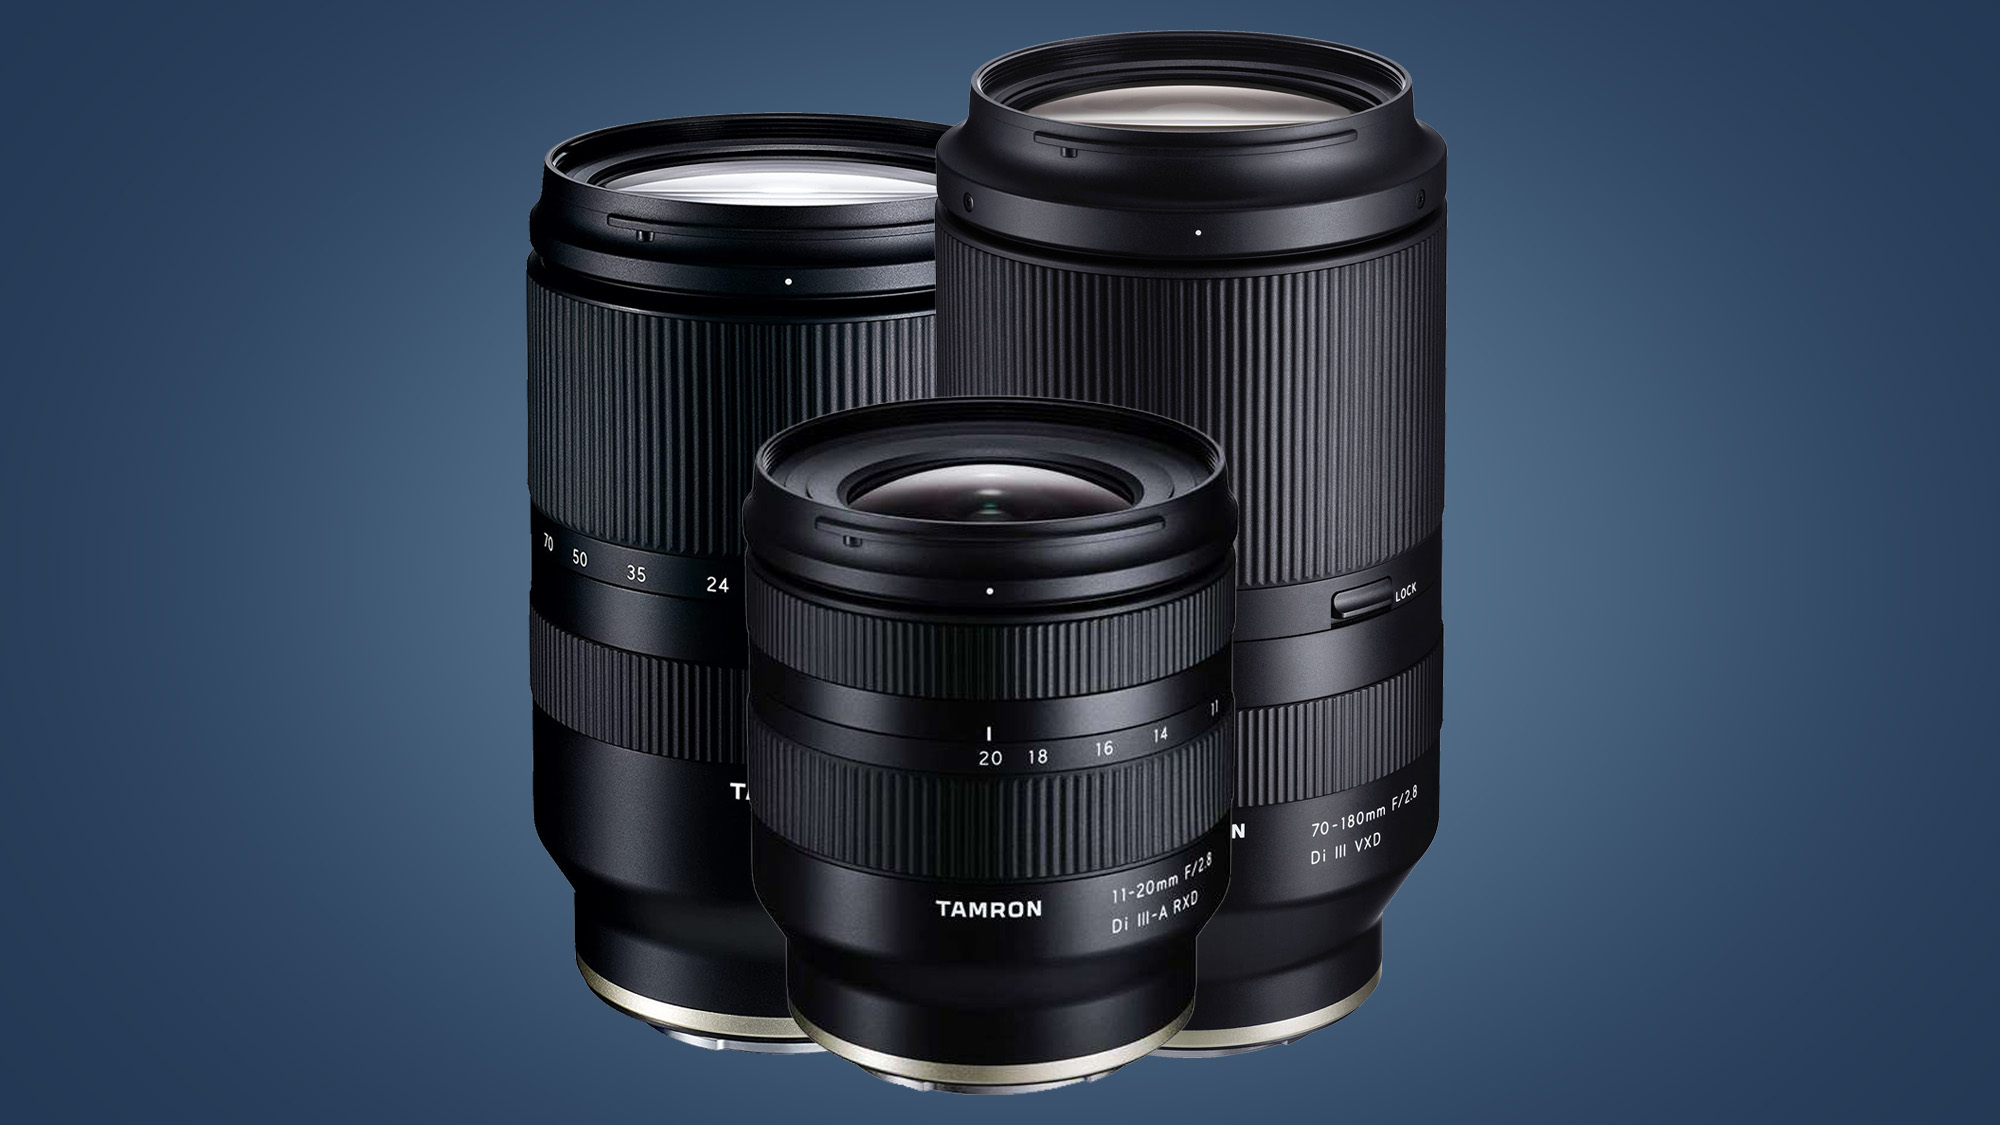 Fujifilm X-series cameras could soon get a new 'holy trinity' of Tamron lenses